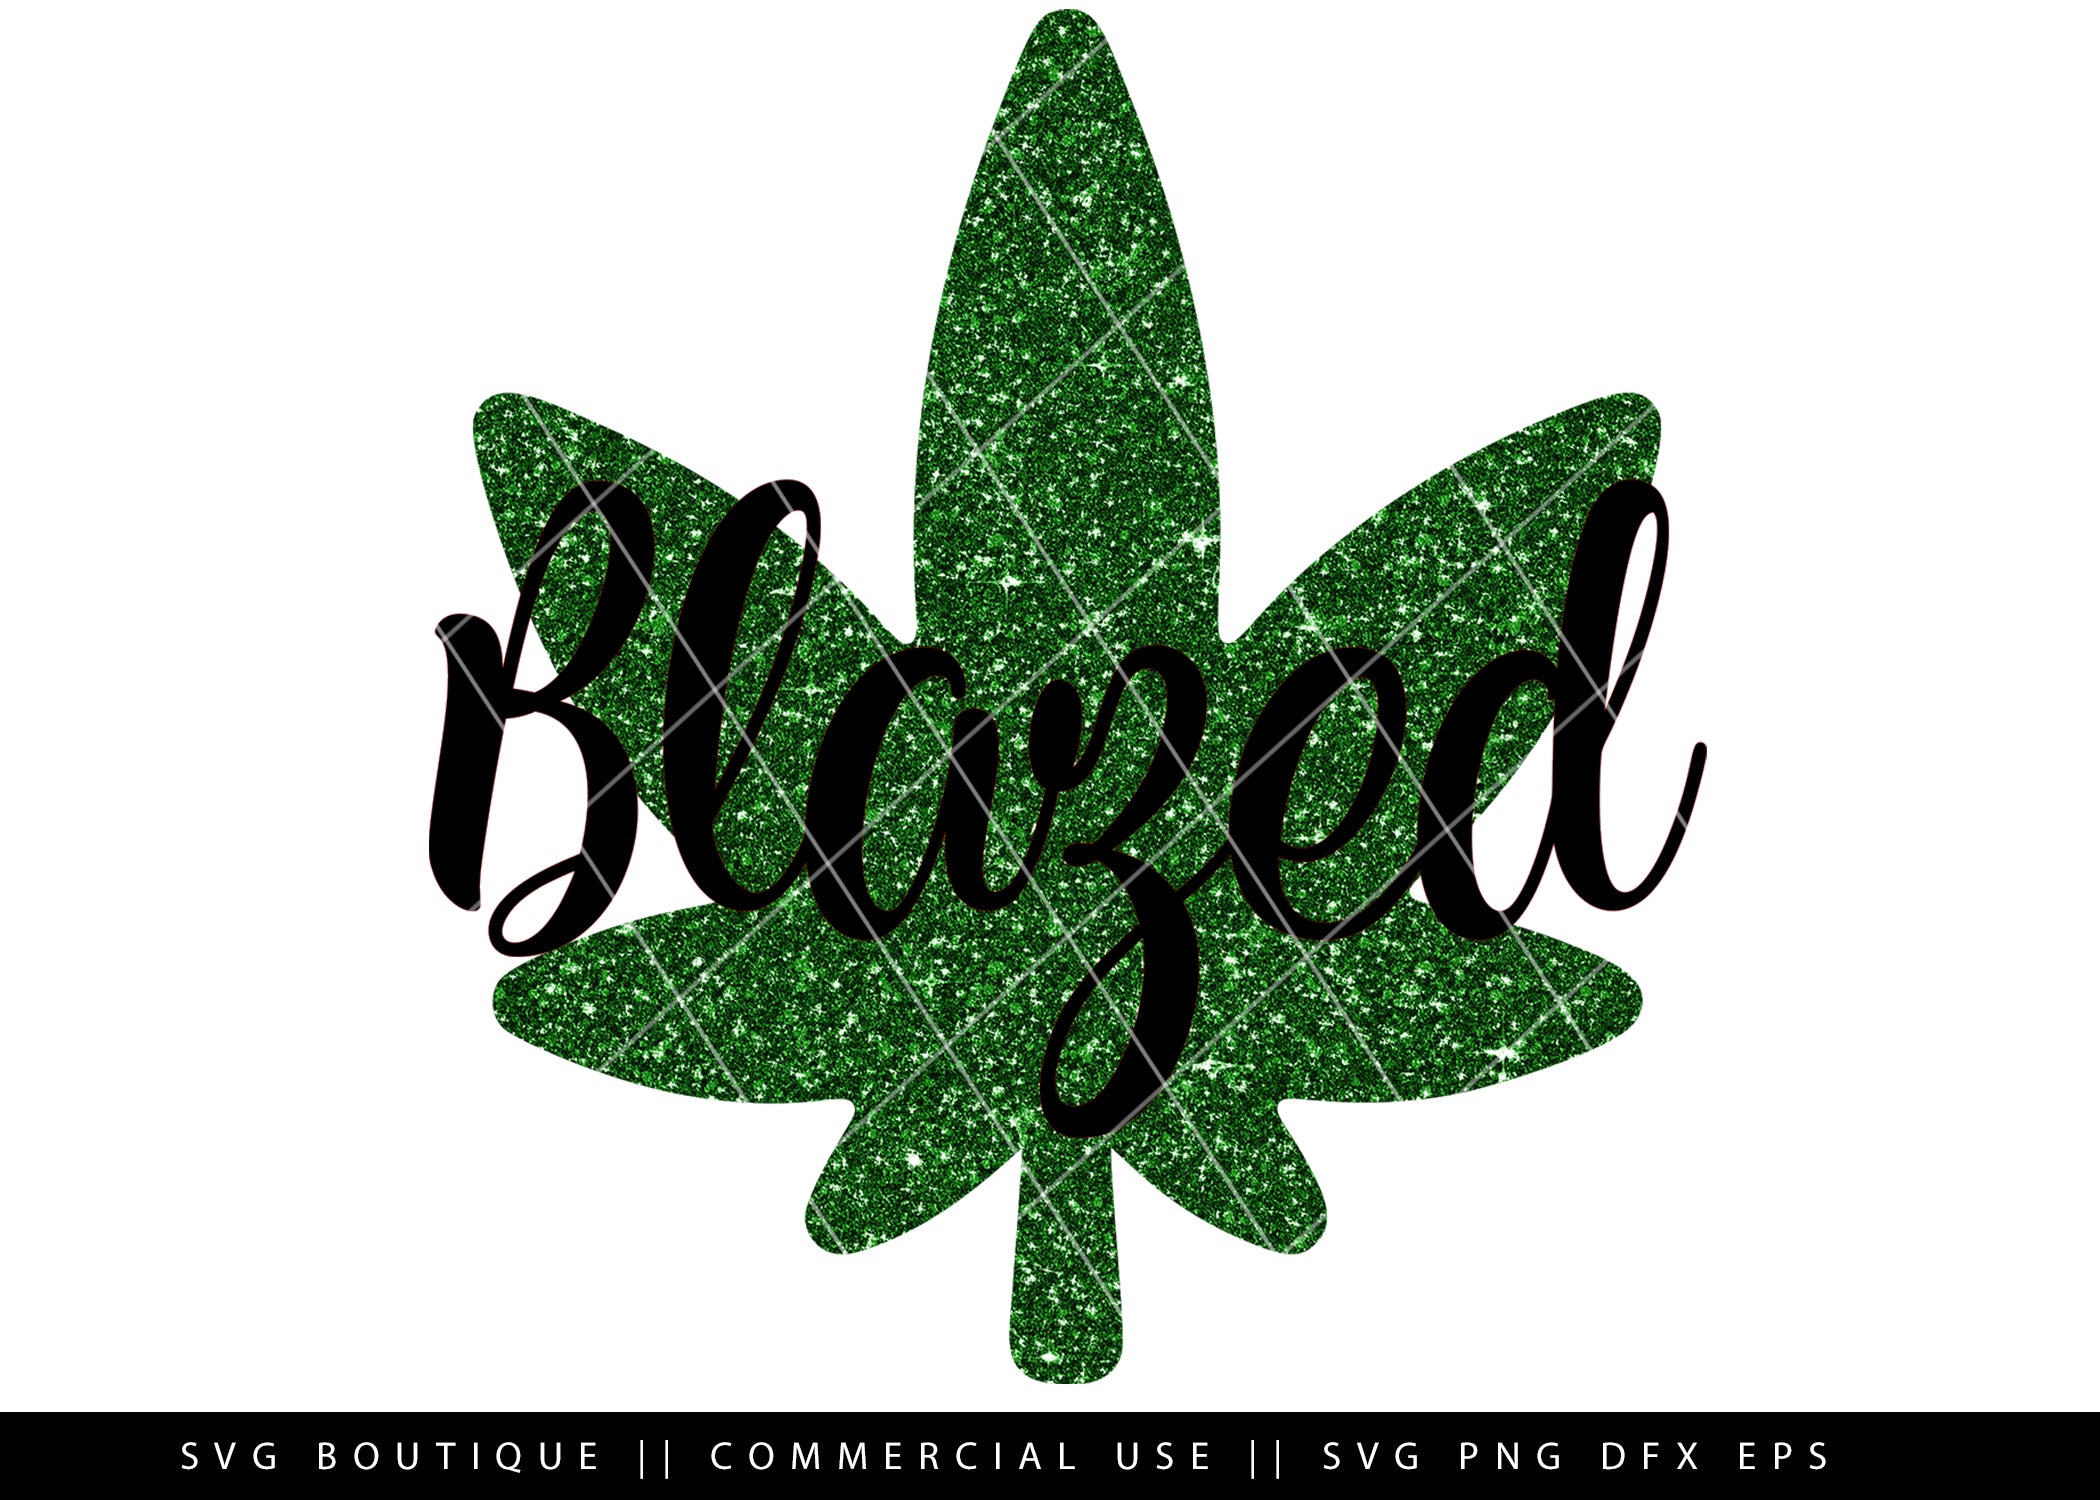 Download Blazed Weed Dope Svg Files Cut File For Silhouette And Cricut Cutt Svg Boutique